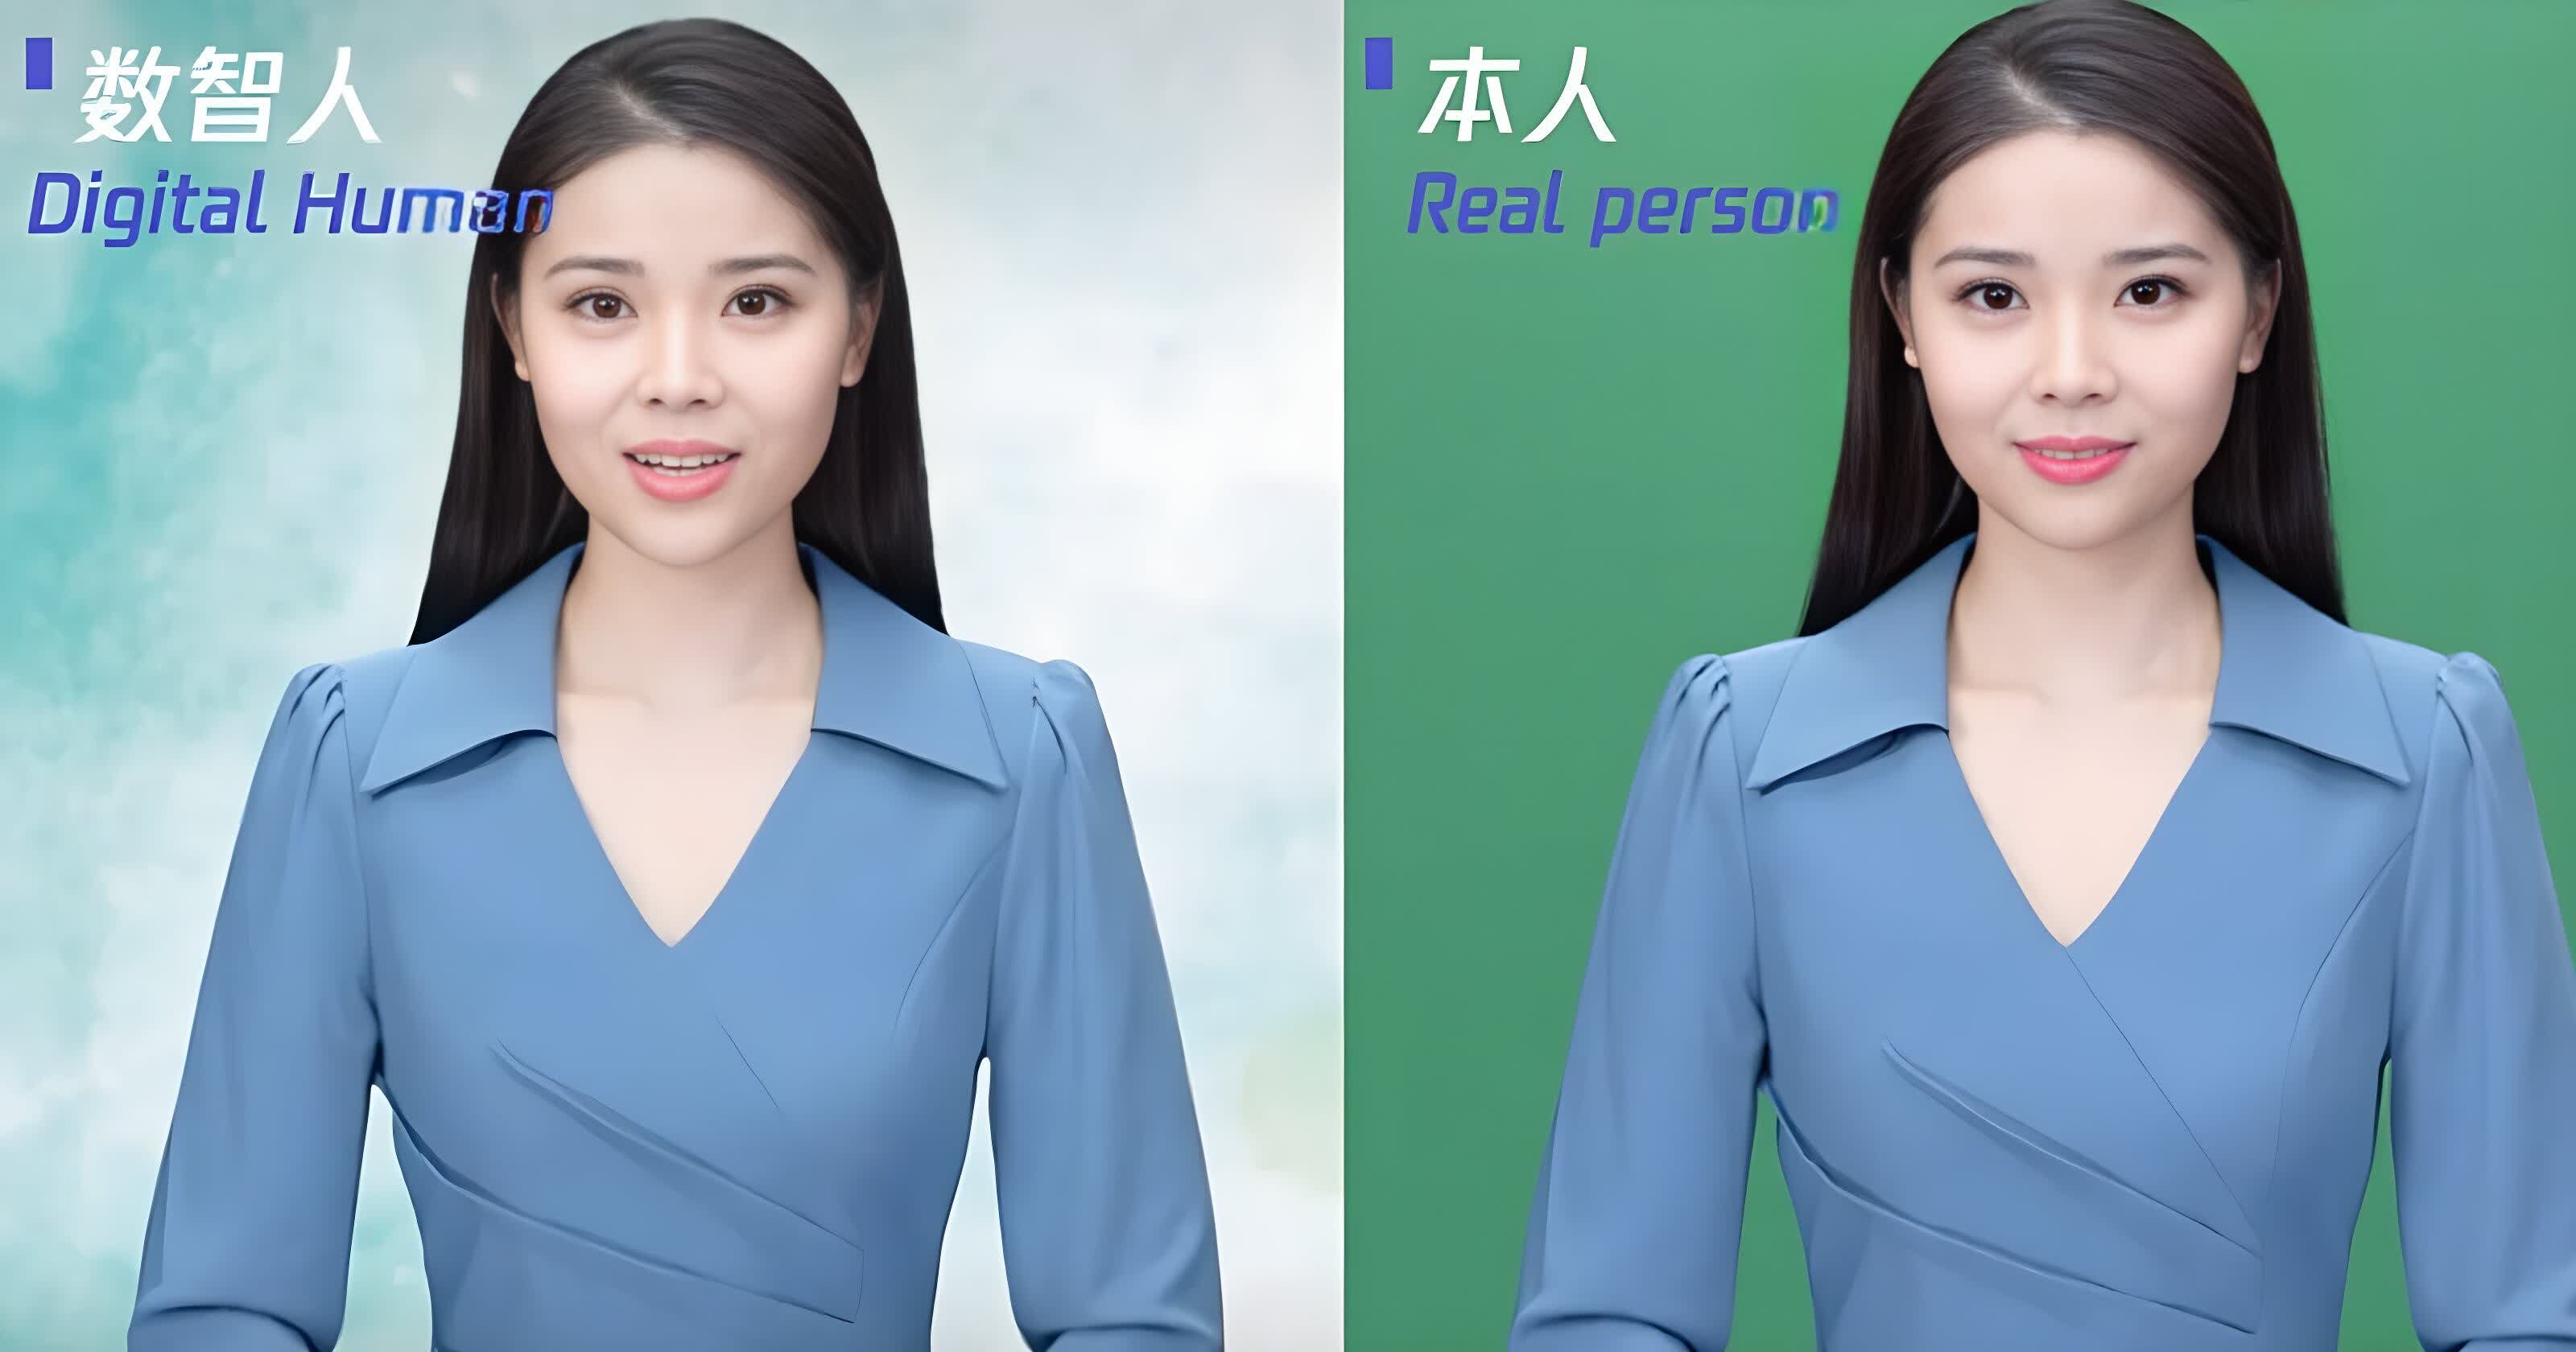 China's Tencent now offers a $145 deepfake creation service